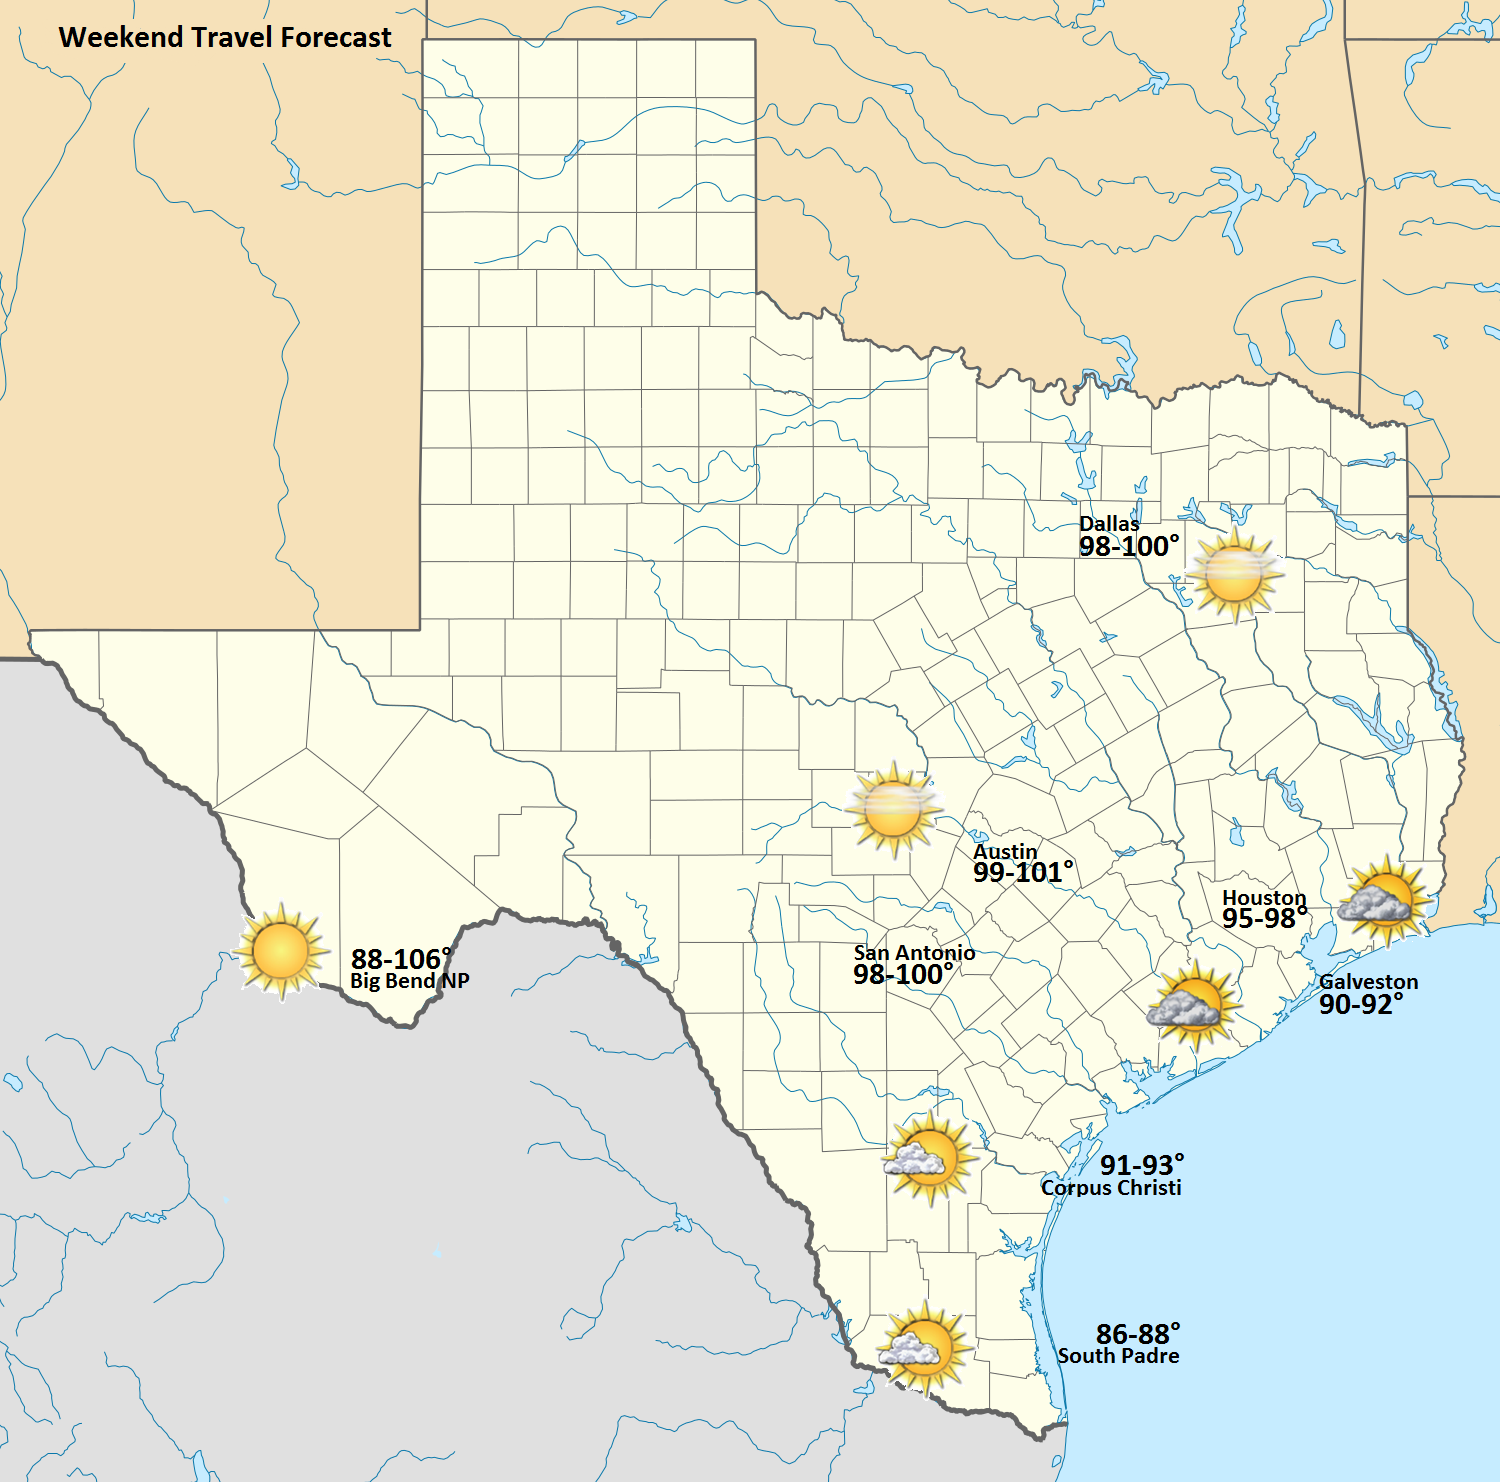 The weekend travel forecast across Texas is quite toasty again. 